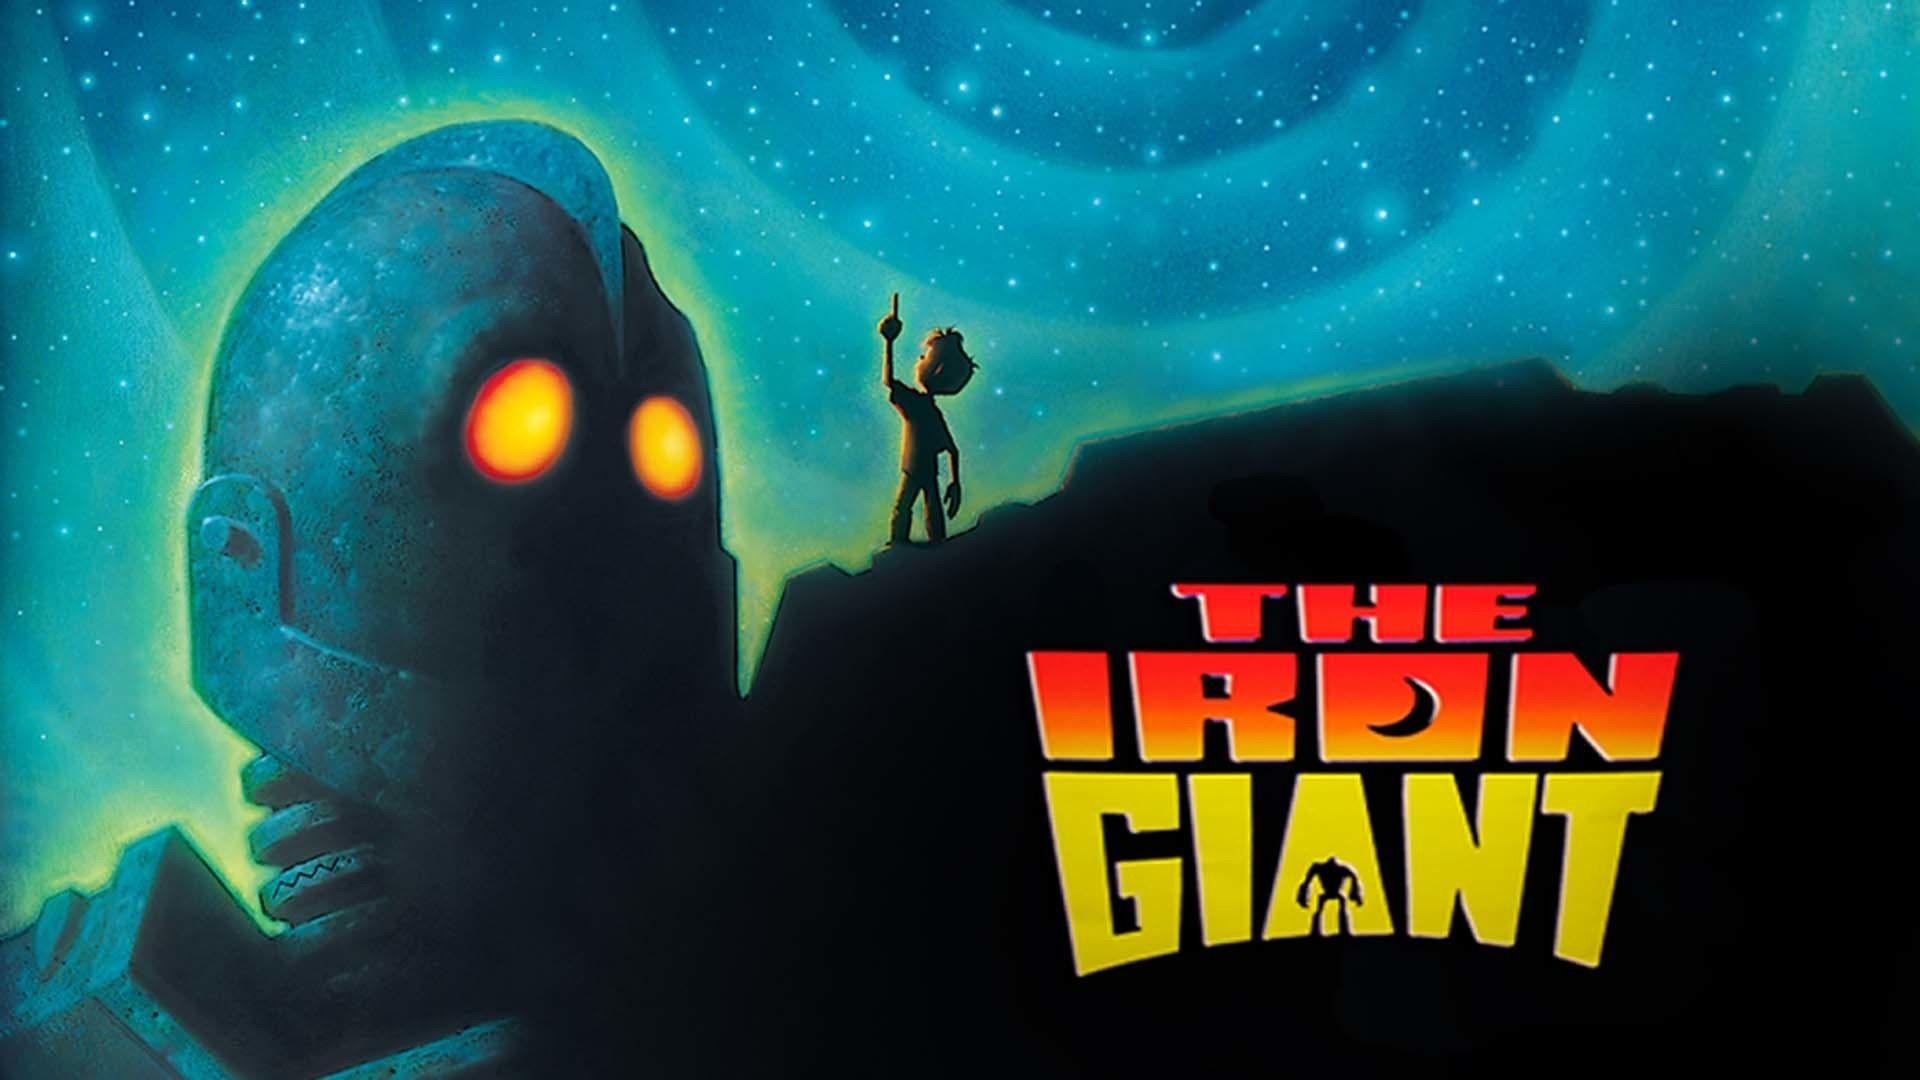 The Iron Giant Wallpaper High Quality